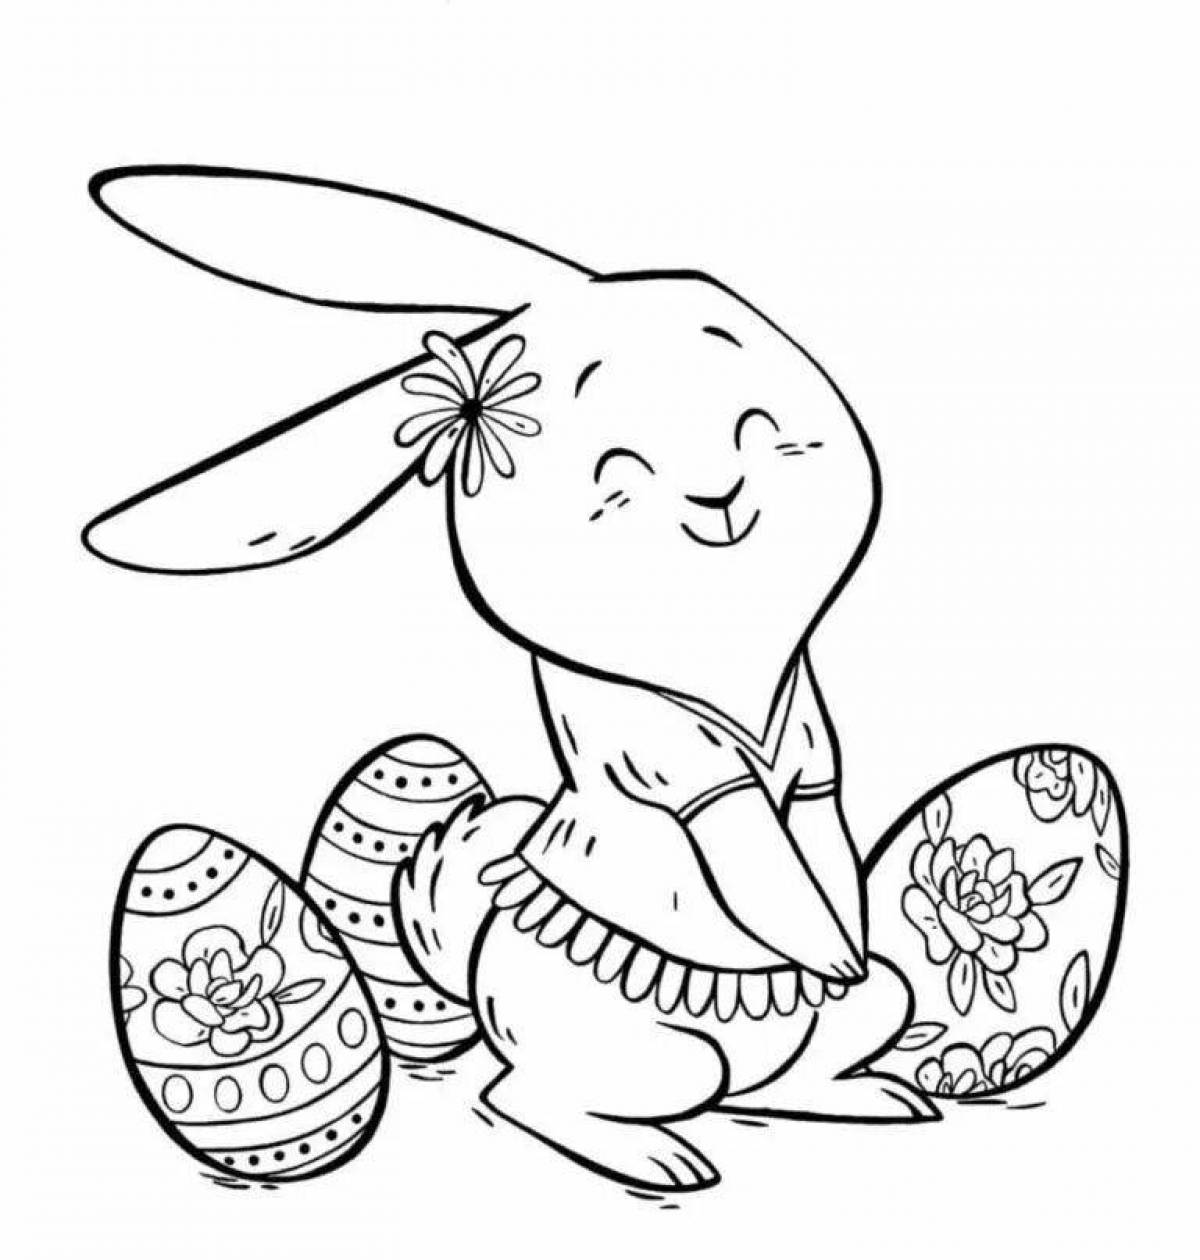 Animated easter bunny coloring page